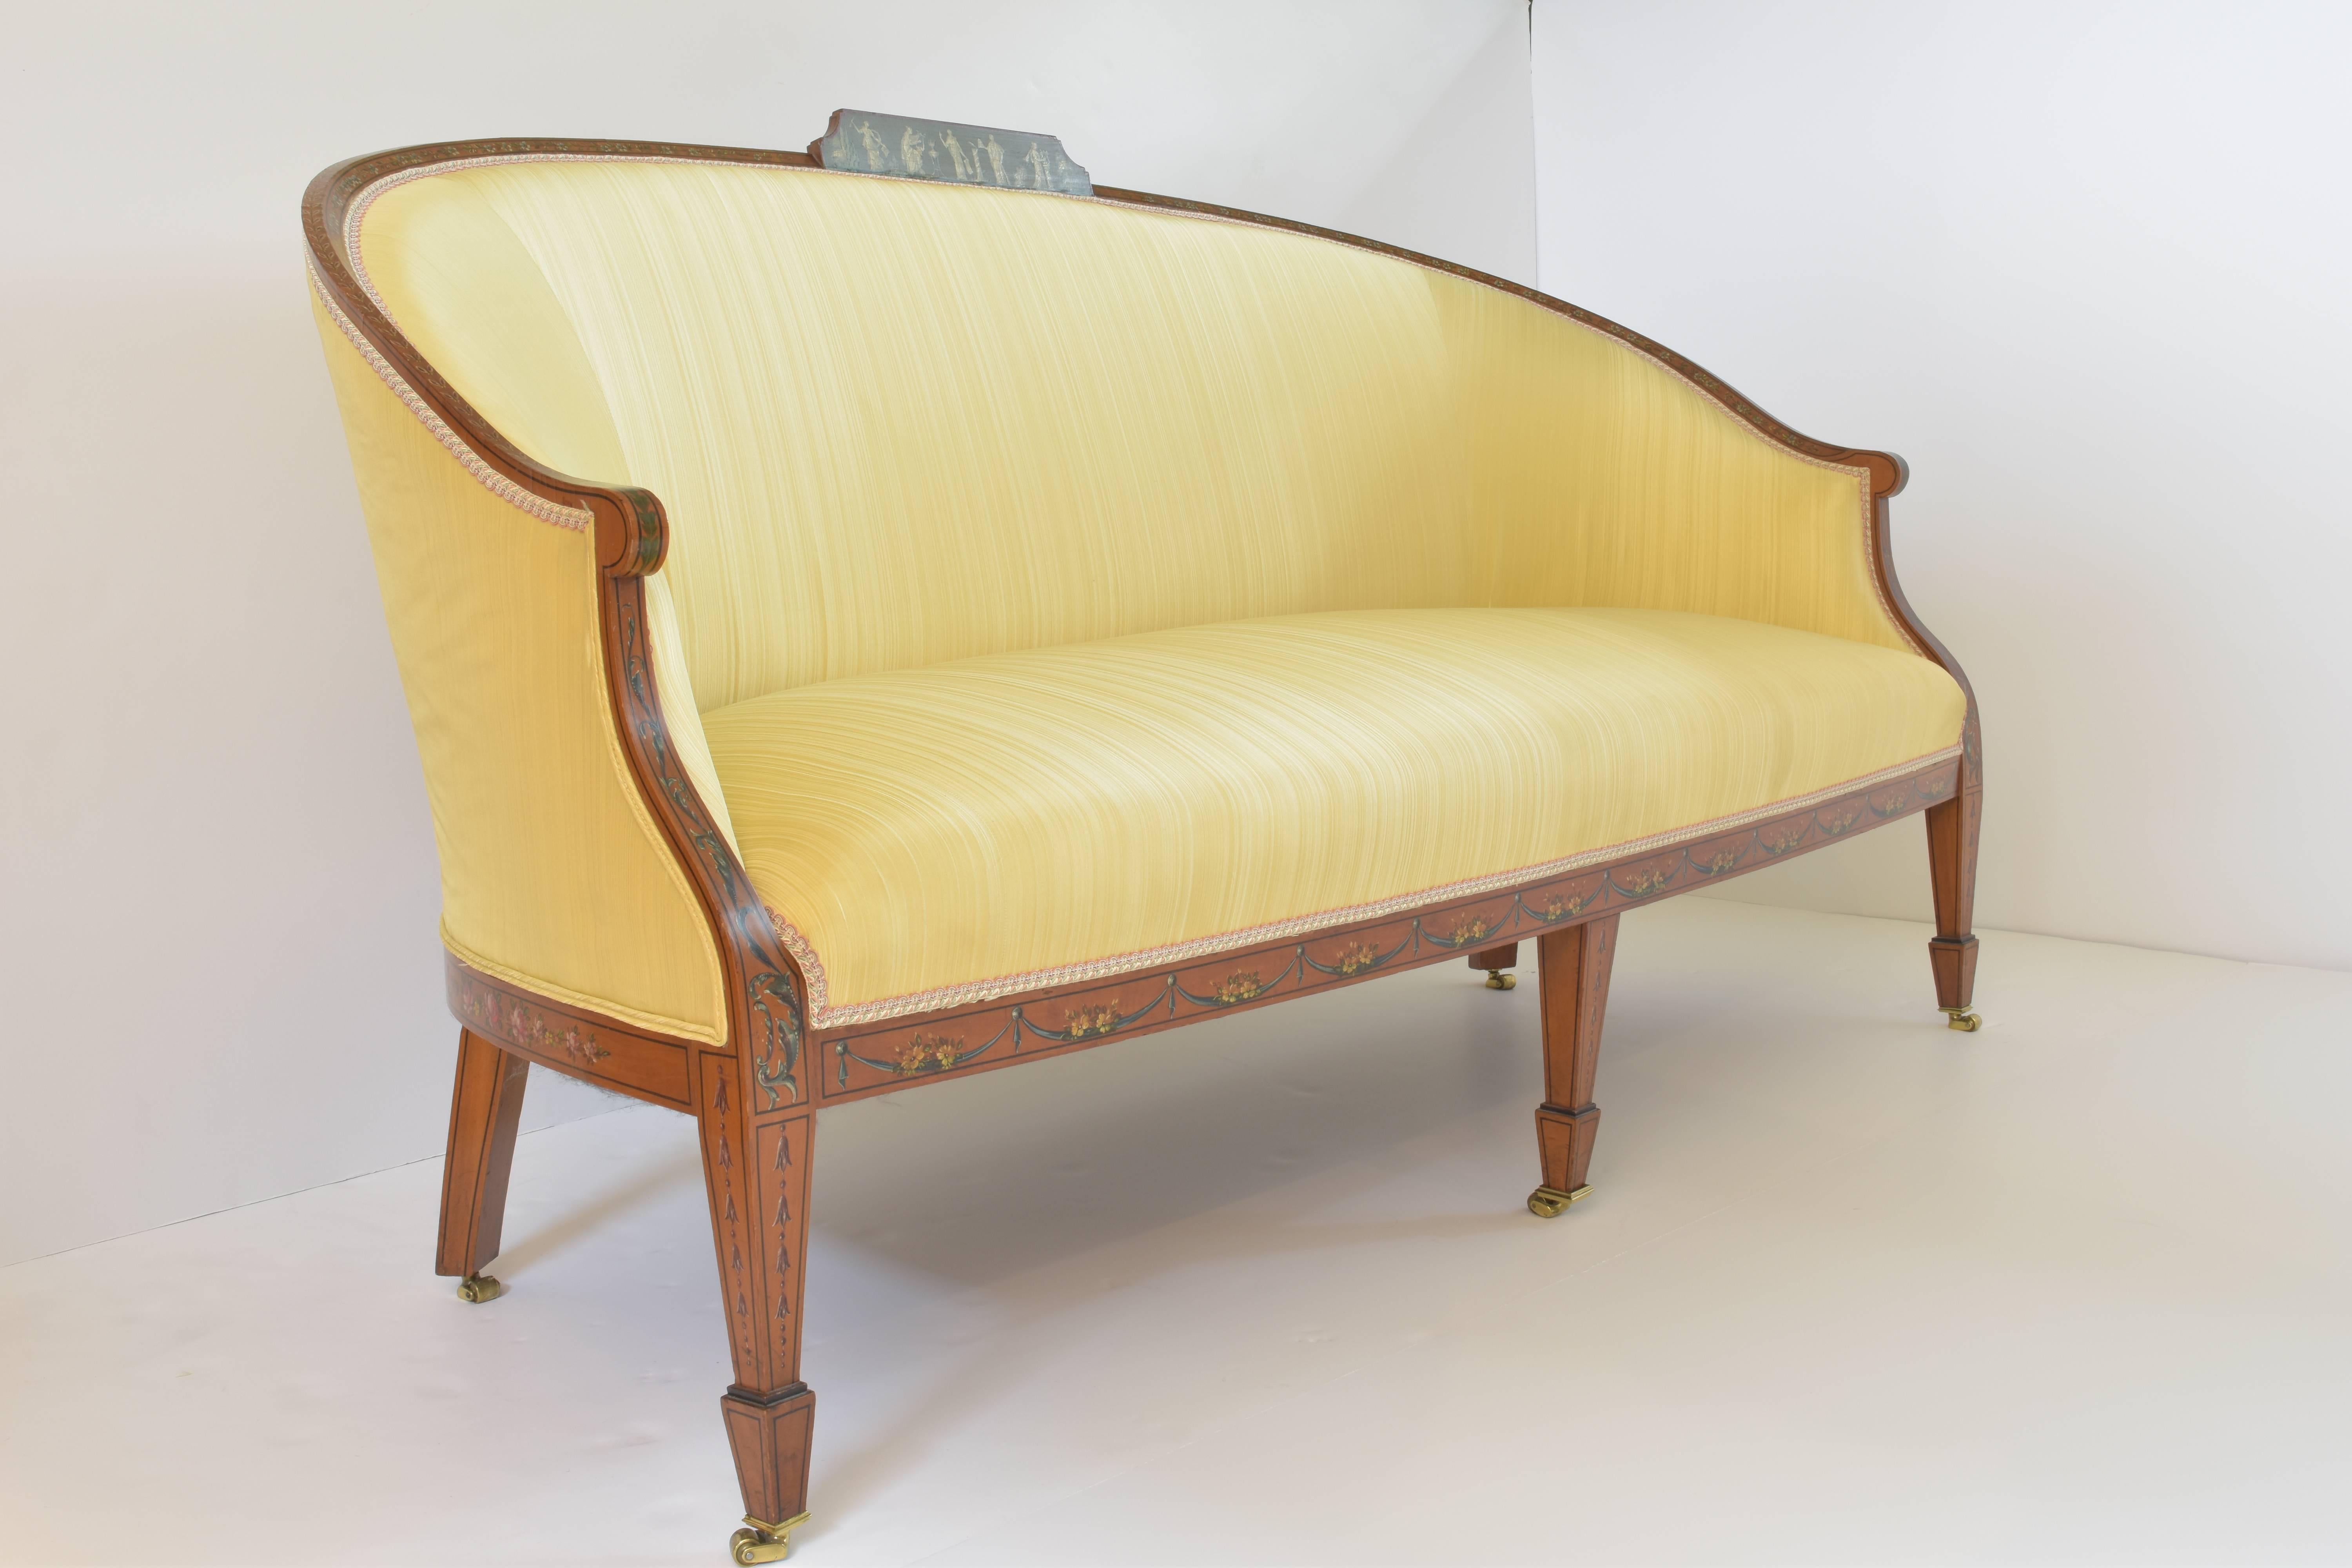 Antique English Sherato satinwood and floral painted sofa with an arched, rounded back sloping sides and arms with a bowed seat; upholstered in yellow silk, raised on square tapering legs, the back with neoclassical figures painted in a frame of